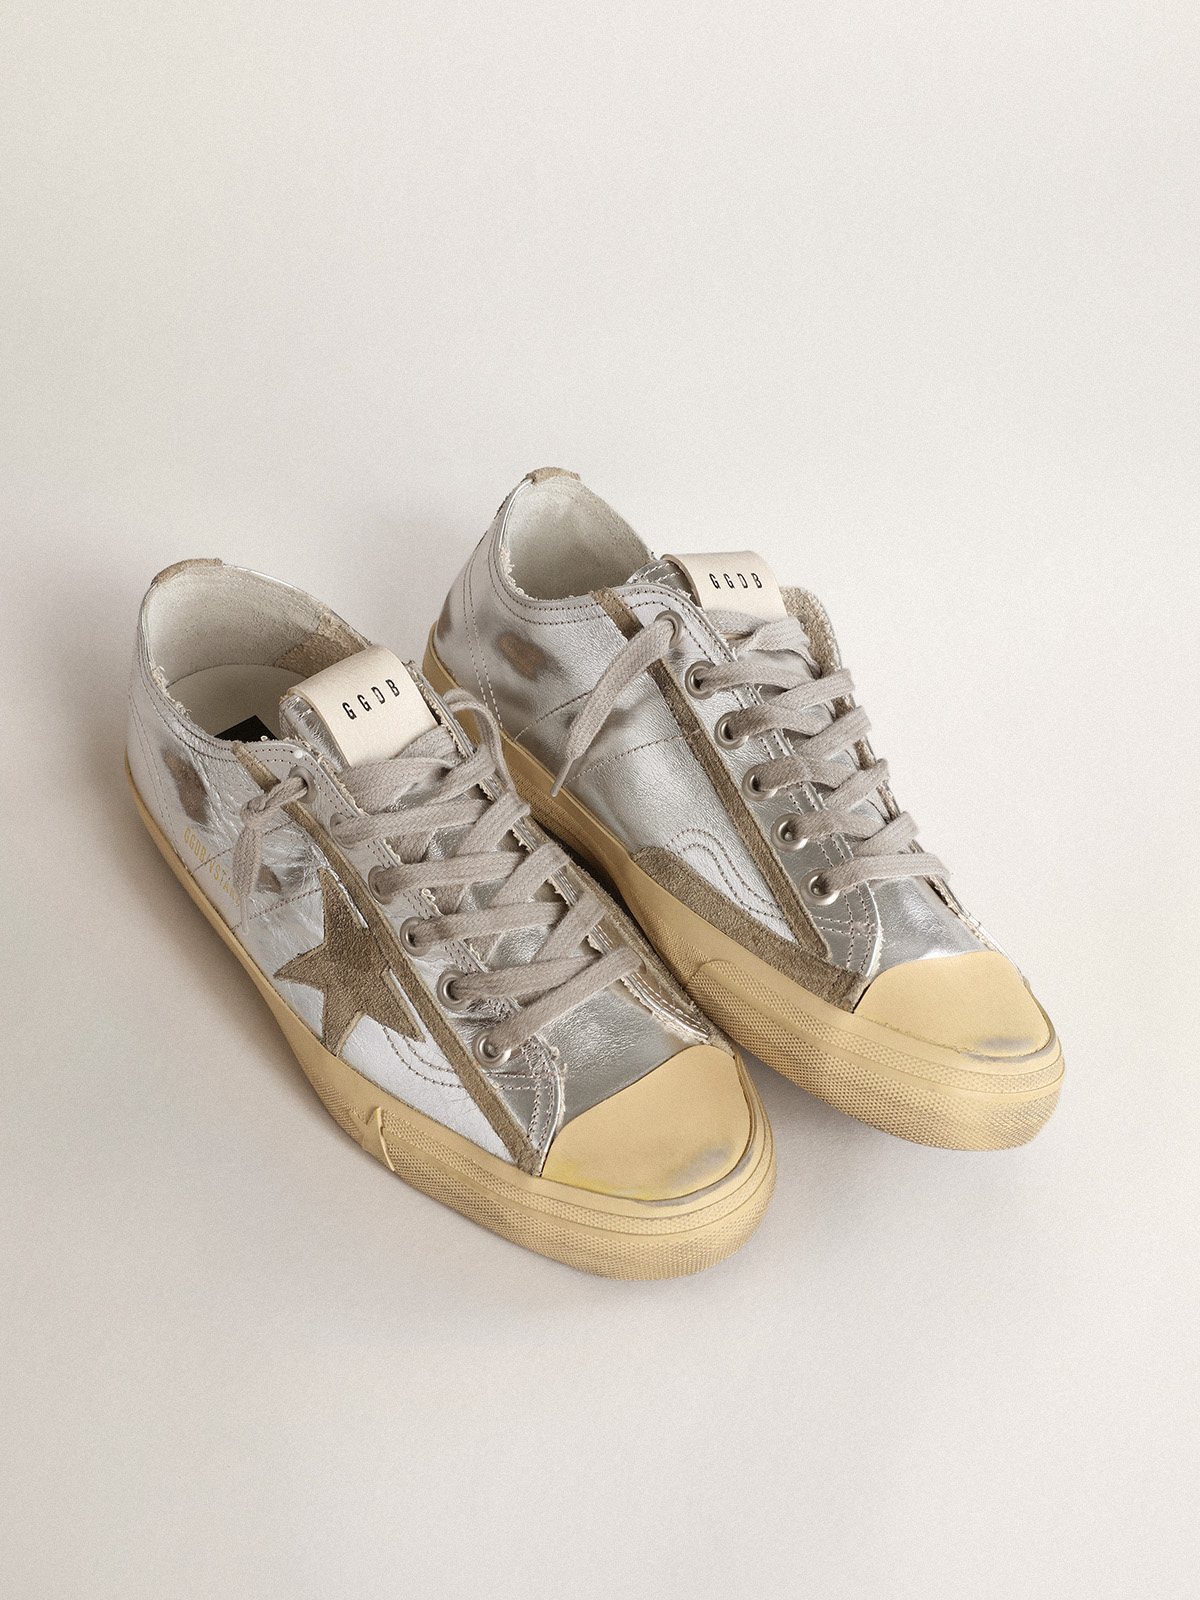 Men's V-Star LTD sneakers in silver metallic leather with star in